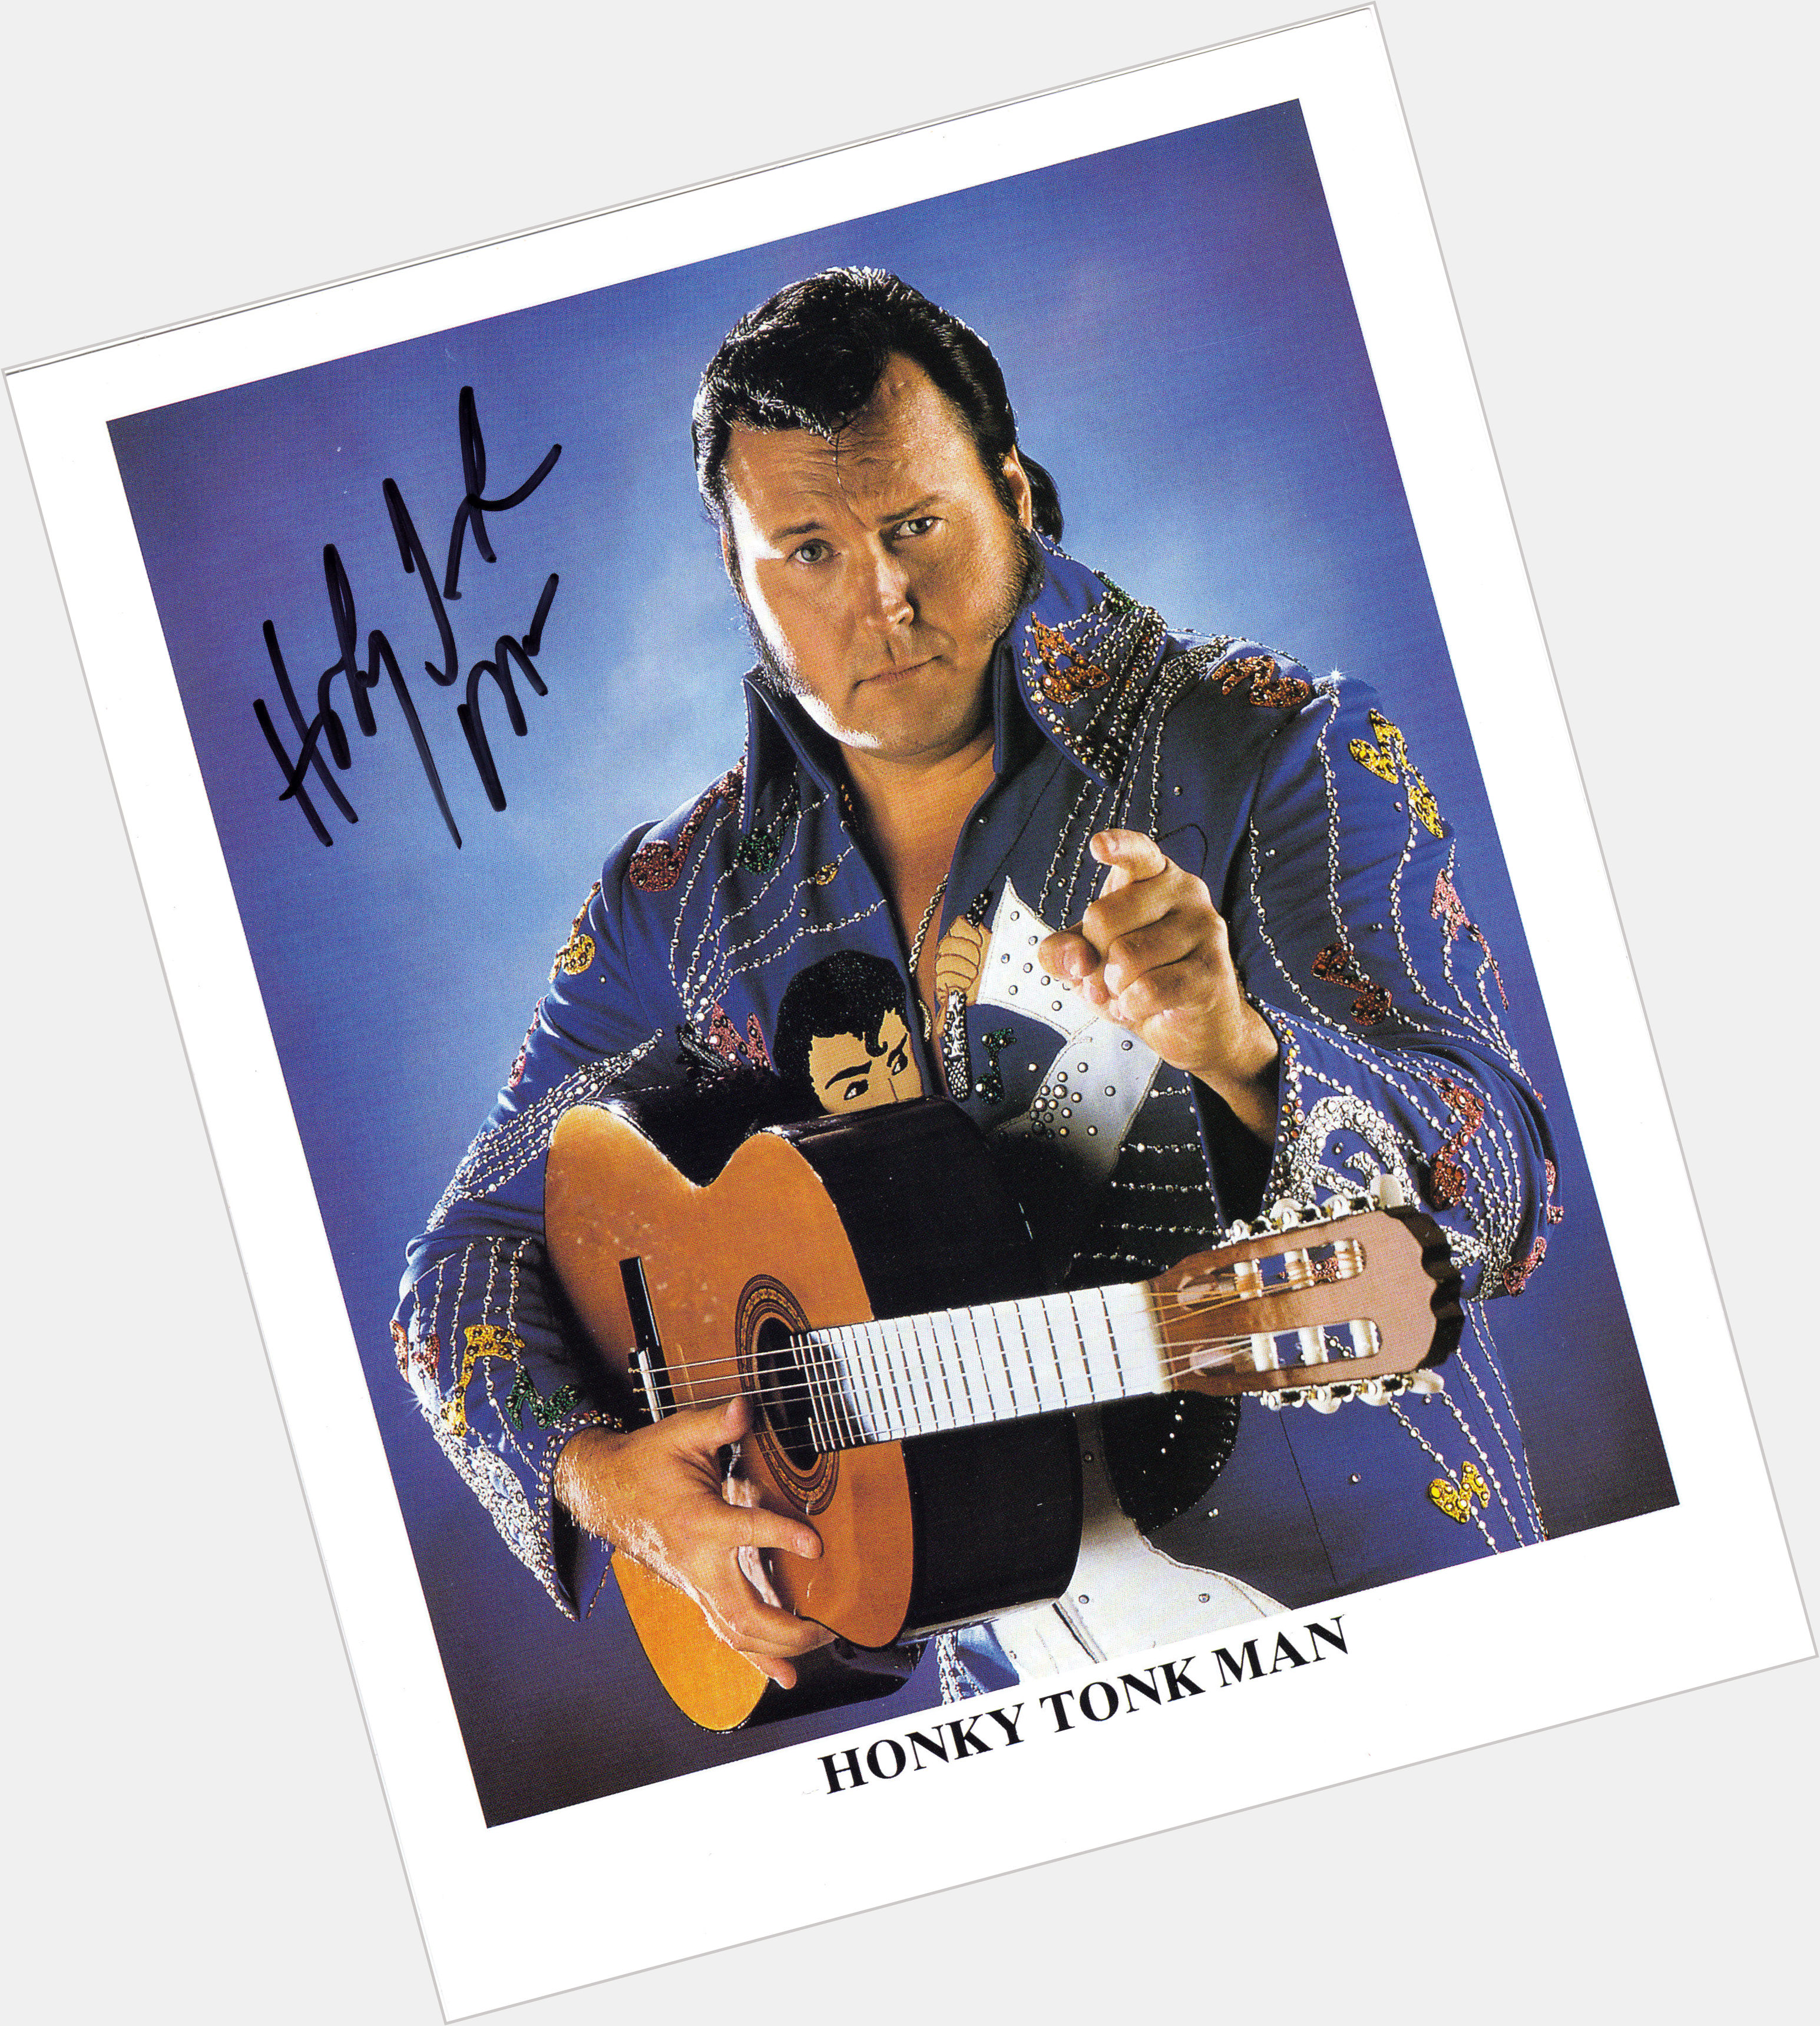 The Honky Tonk Man dating 3